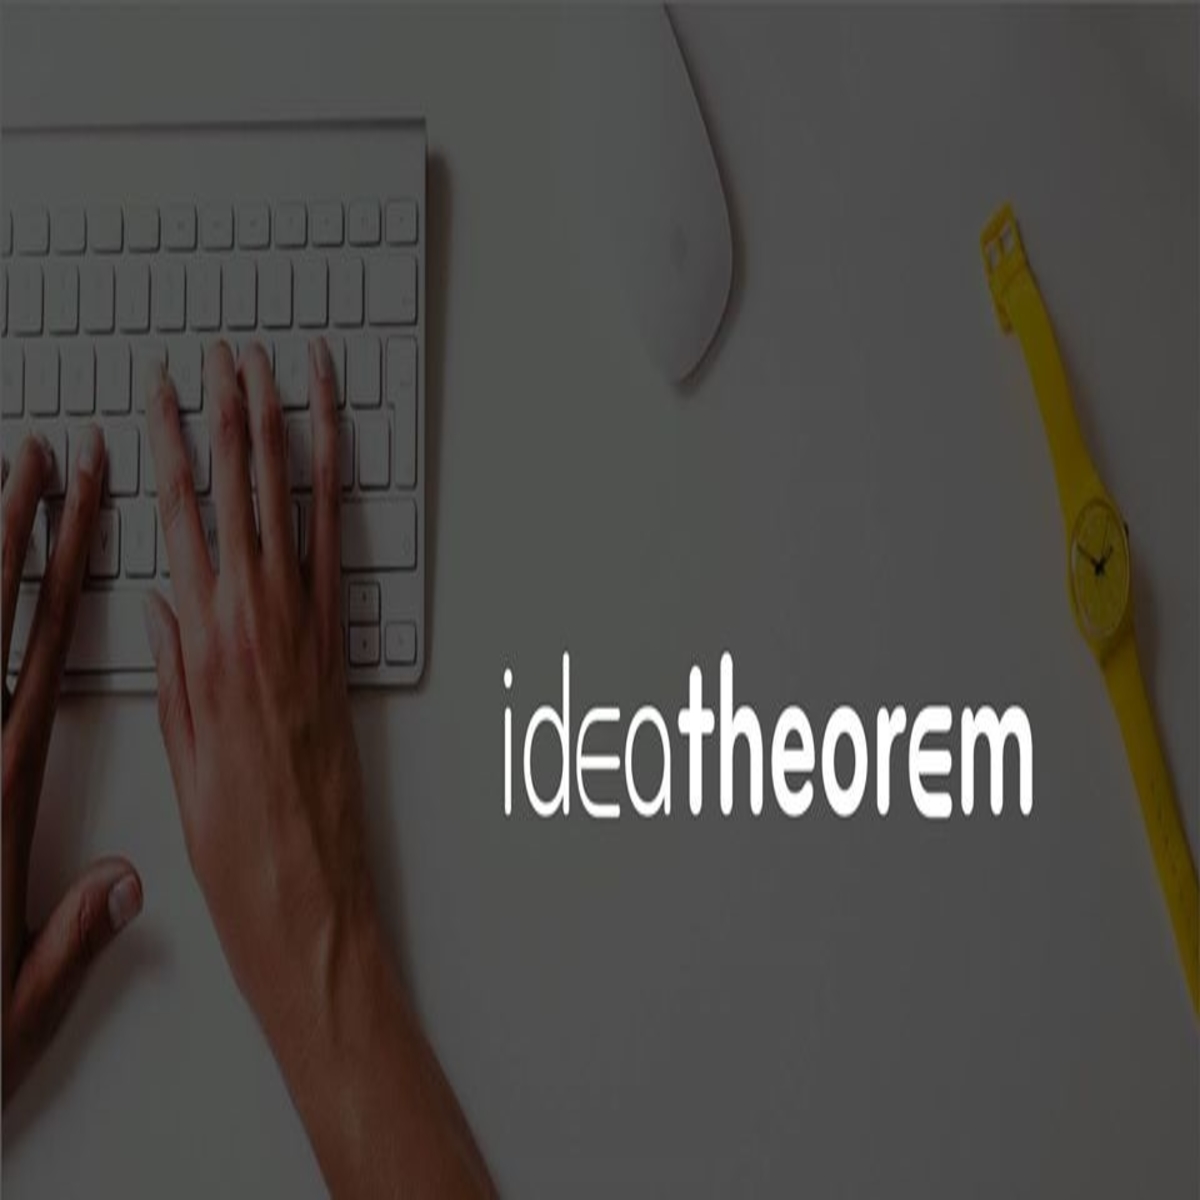 UI UX agency from Idea Theorem